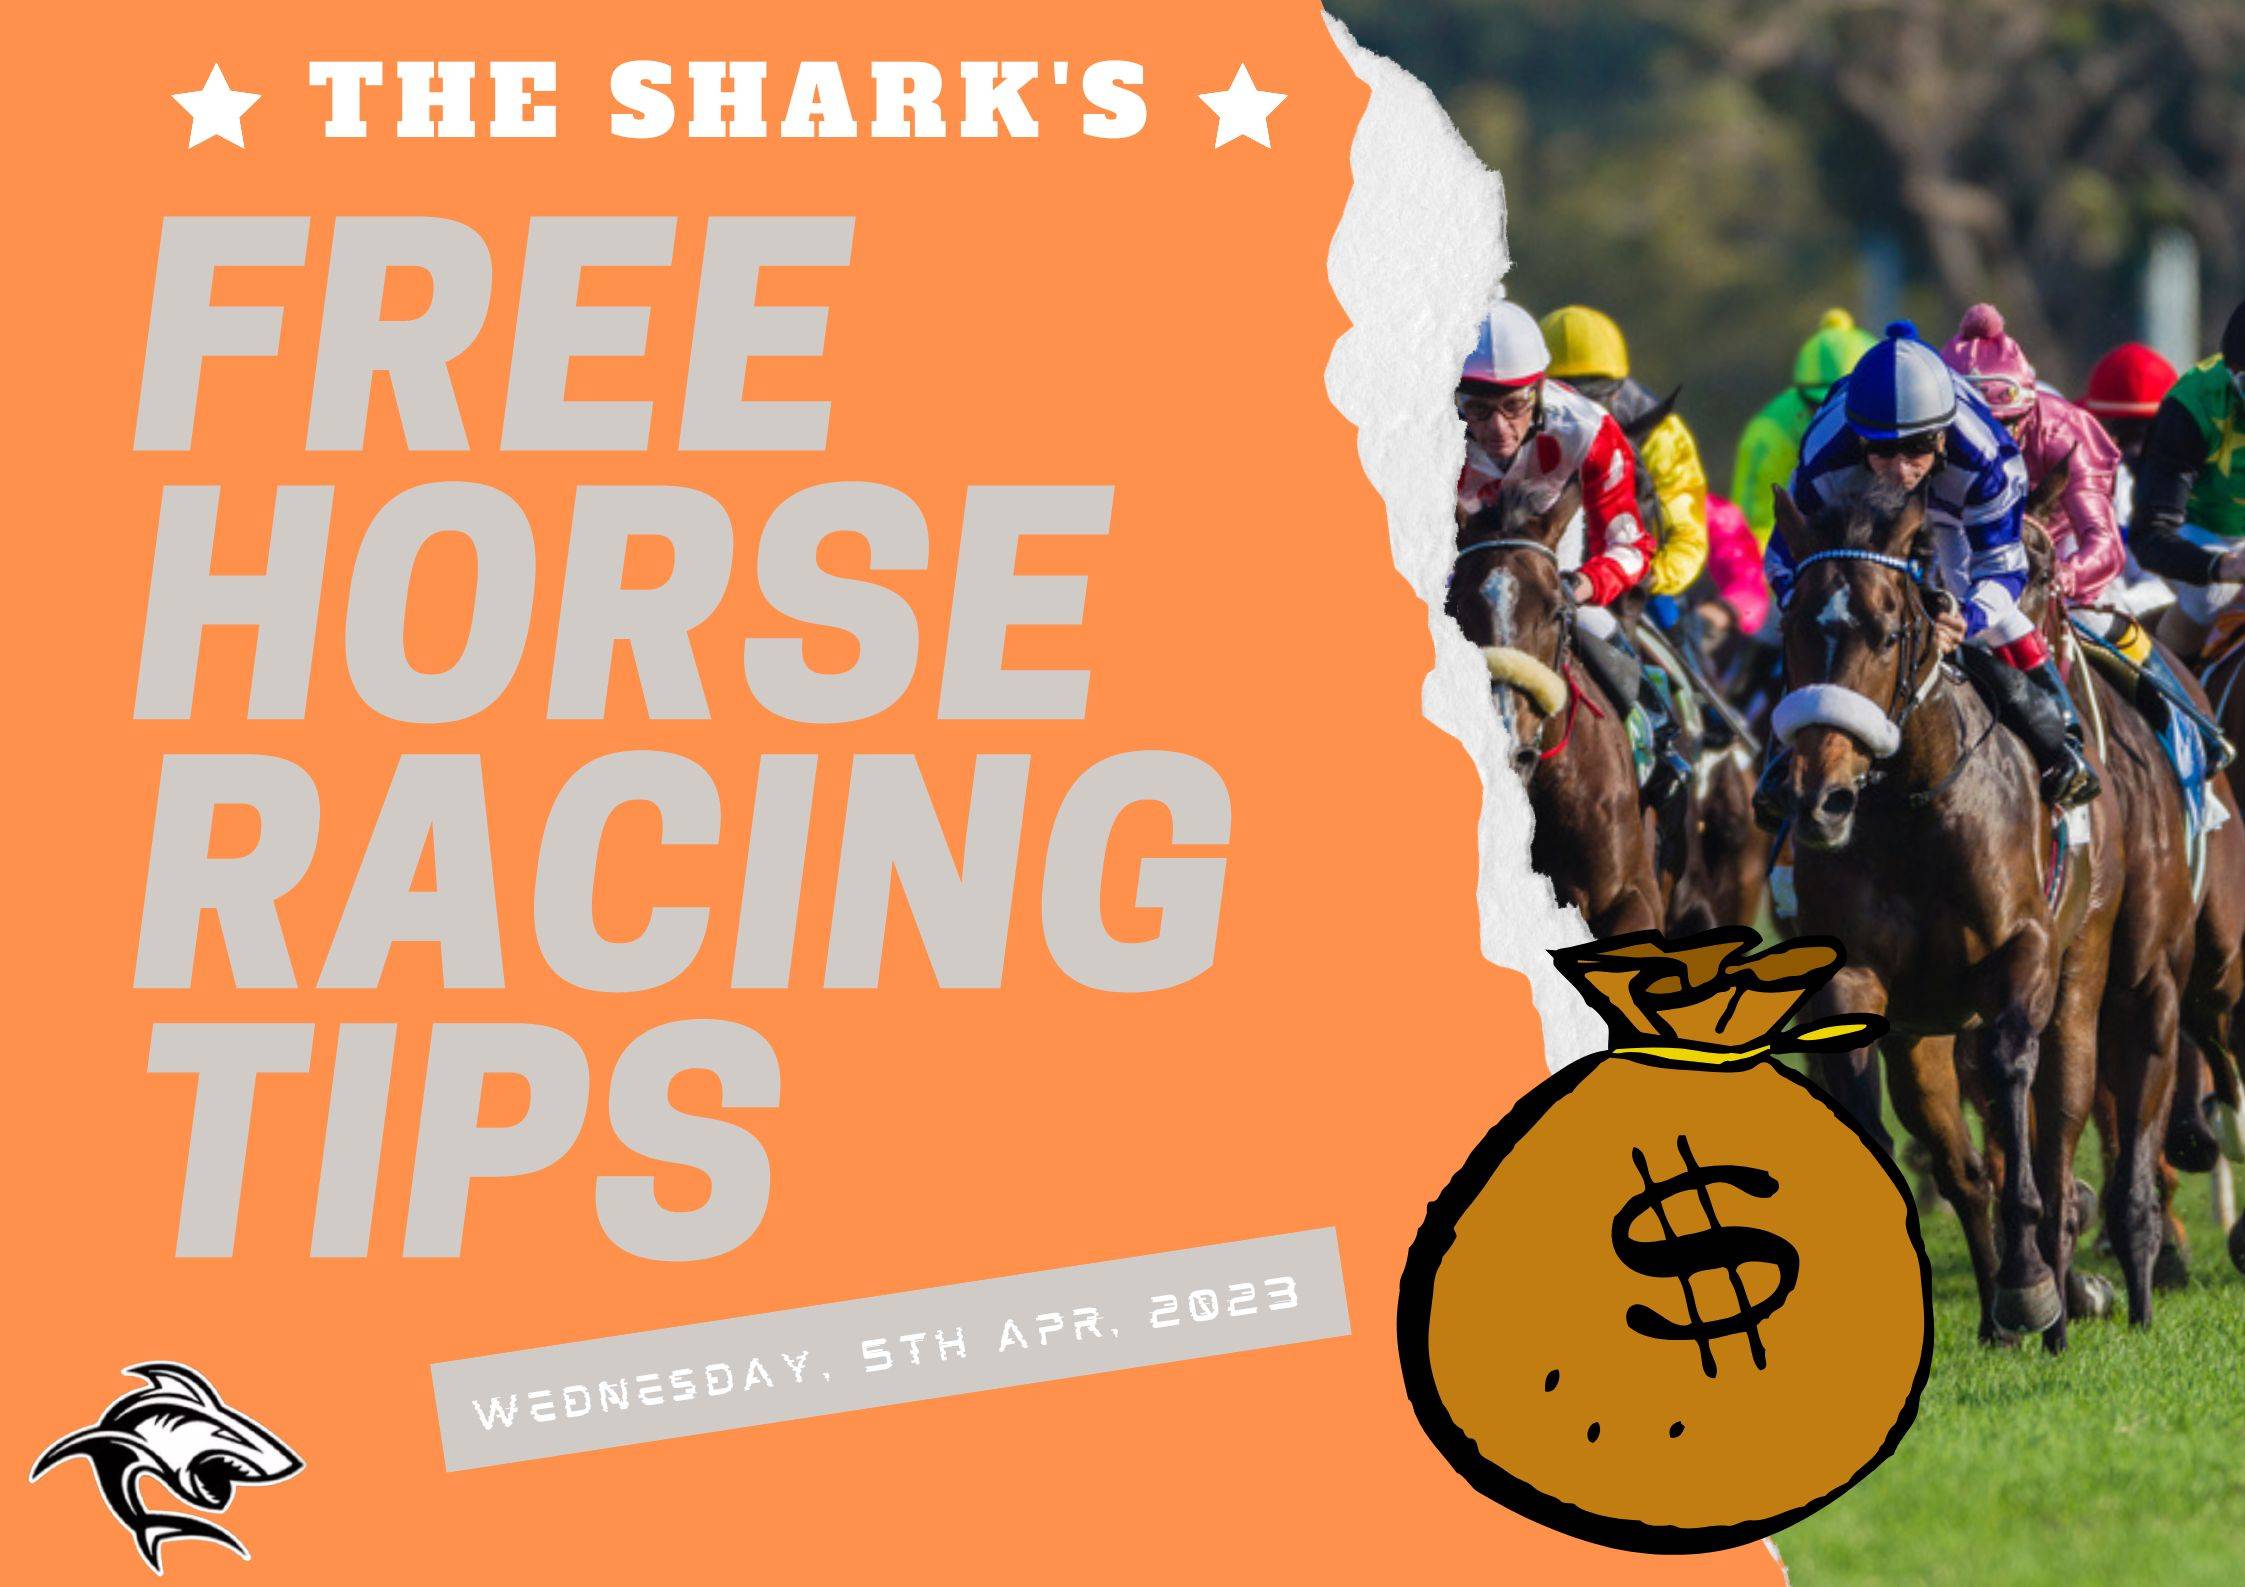 Free Horse Racing Tips - 5th Apr